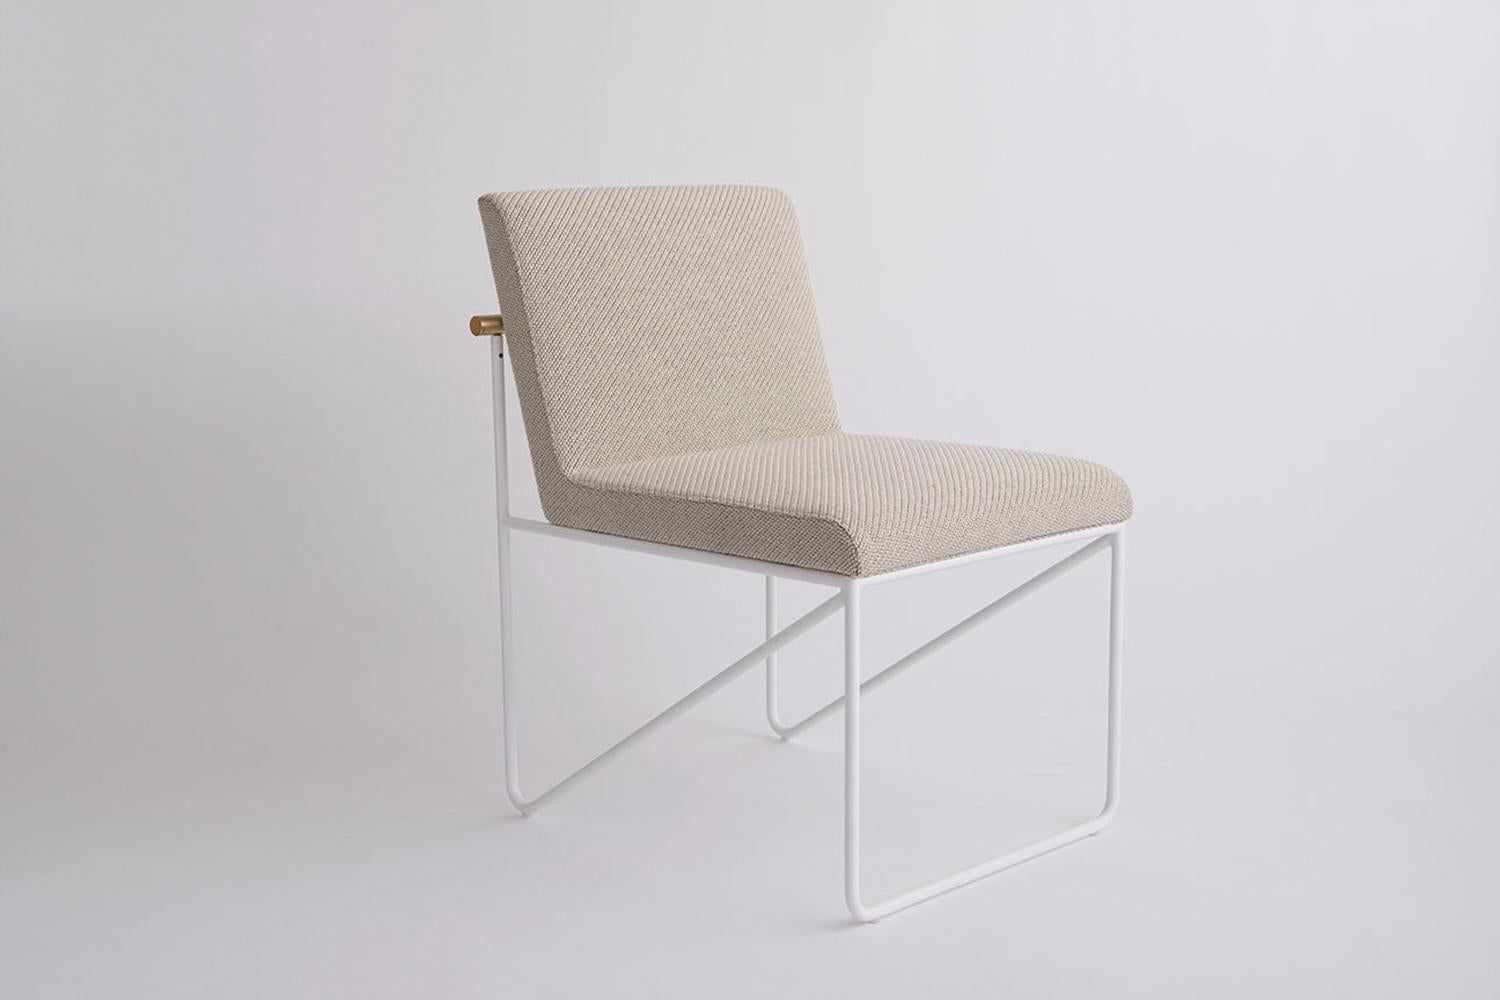 Important to note that this listing is for the Kickstand Side Chair (Armless) in a Flat White Powder Coat Finish. Pricing is COM and this listing does not include the price of fabric. A configuration with arms is also available; see separate